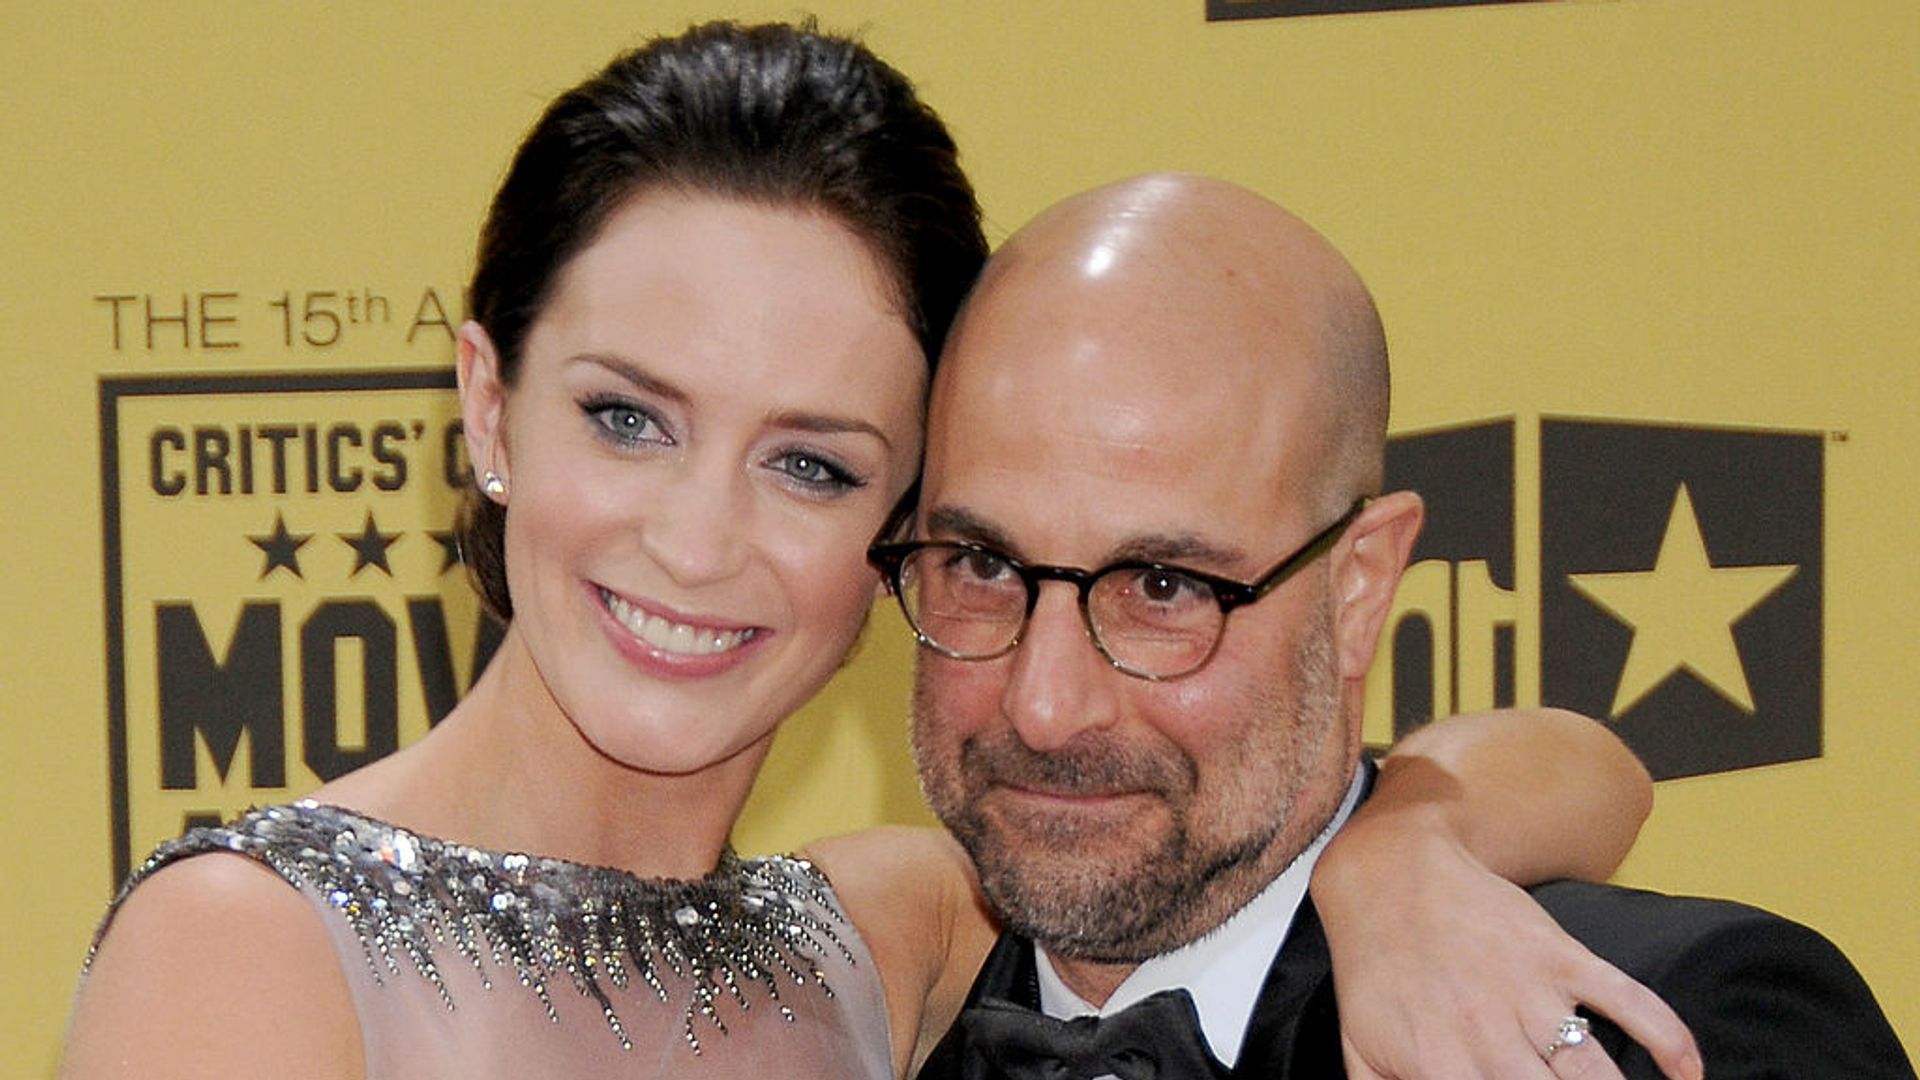 Emily Blunt wearing a high neck sequin gown as she cuddles her co-star Stanley Tucci